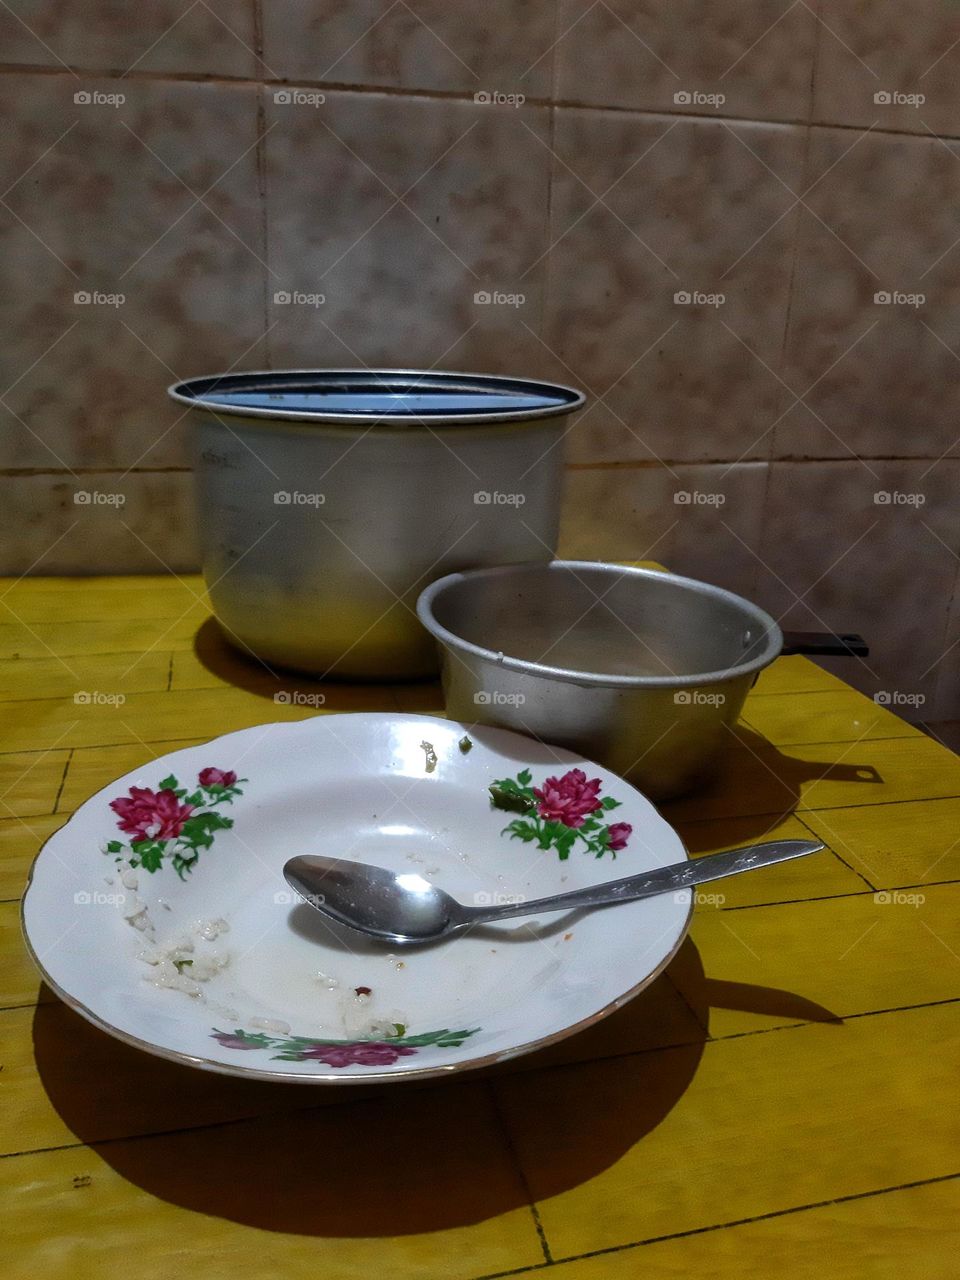 Three things found in kitchen: an empty plate and its spoon, and two pans